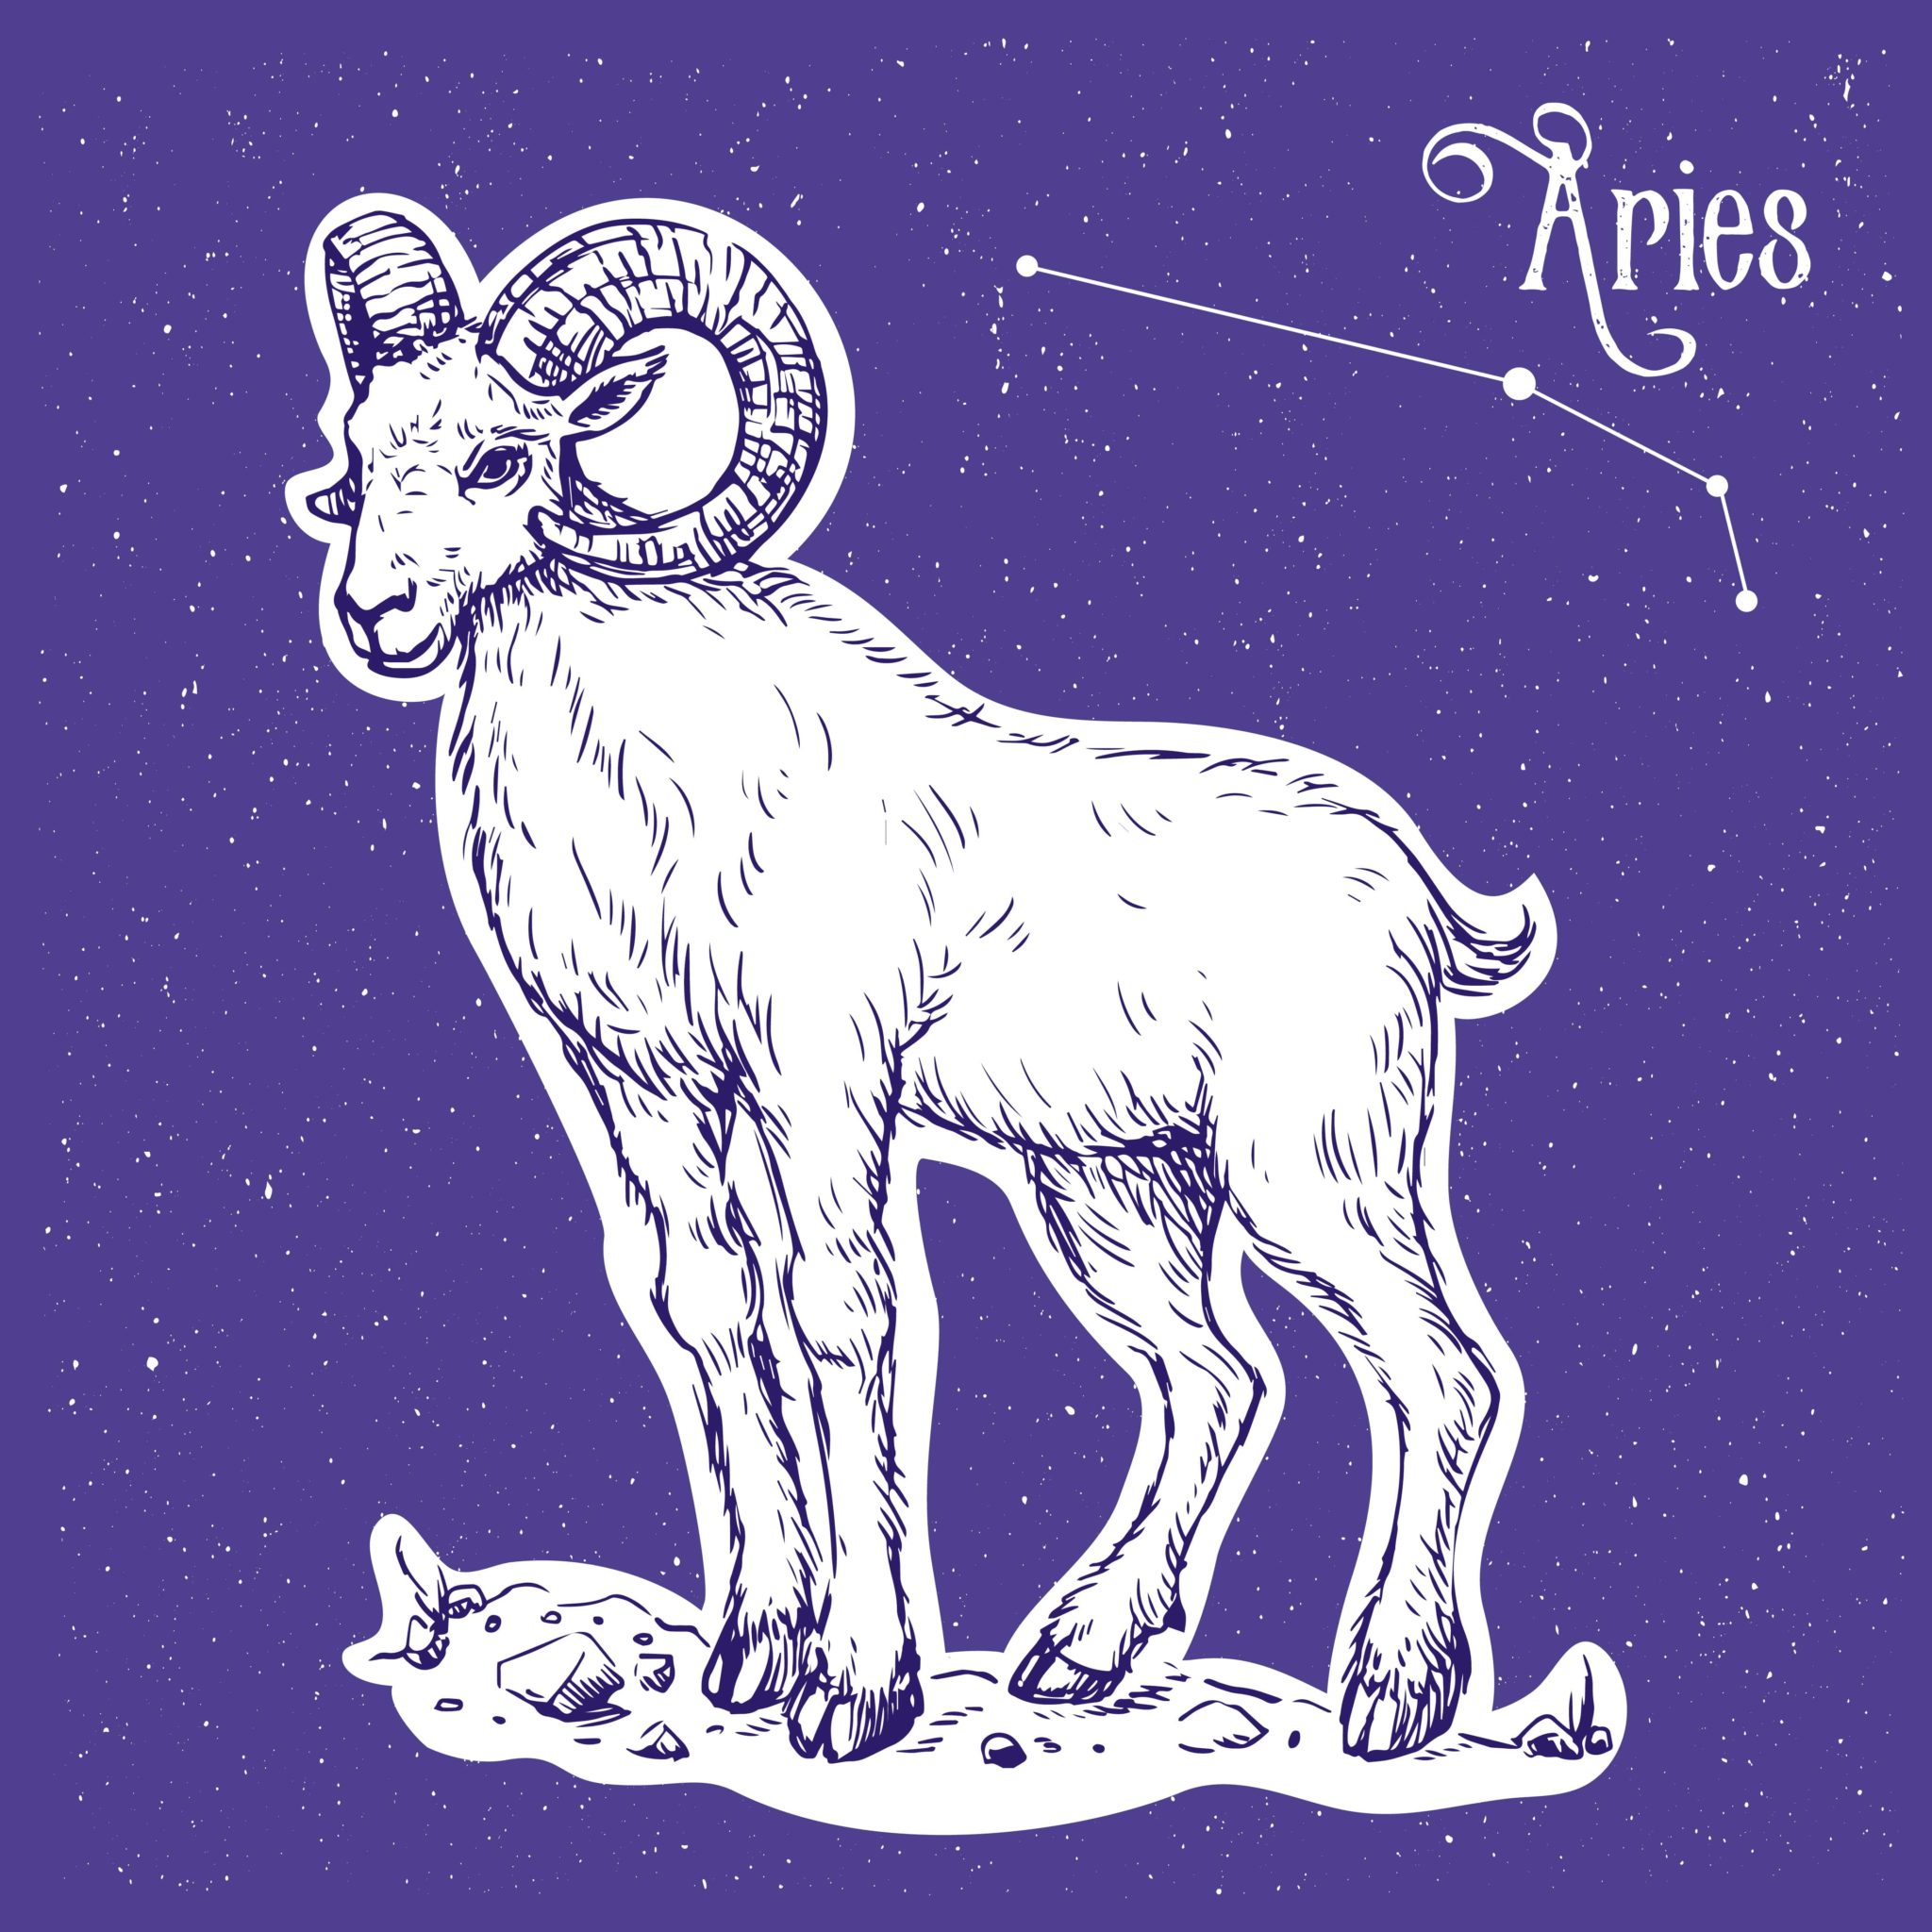 10 Reasons Aries Is The Worst Astrological Sign | Top 10 Lists ...